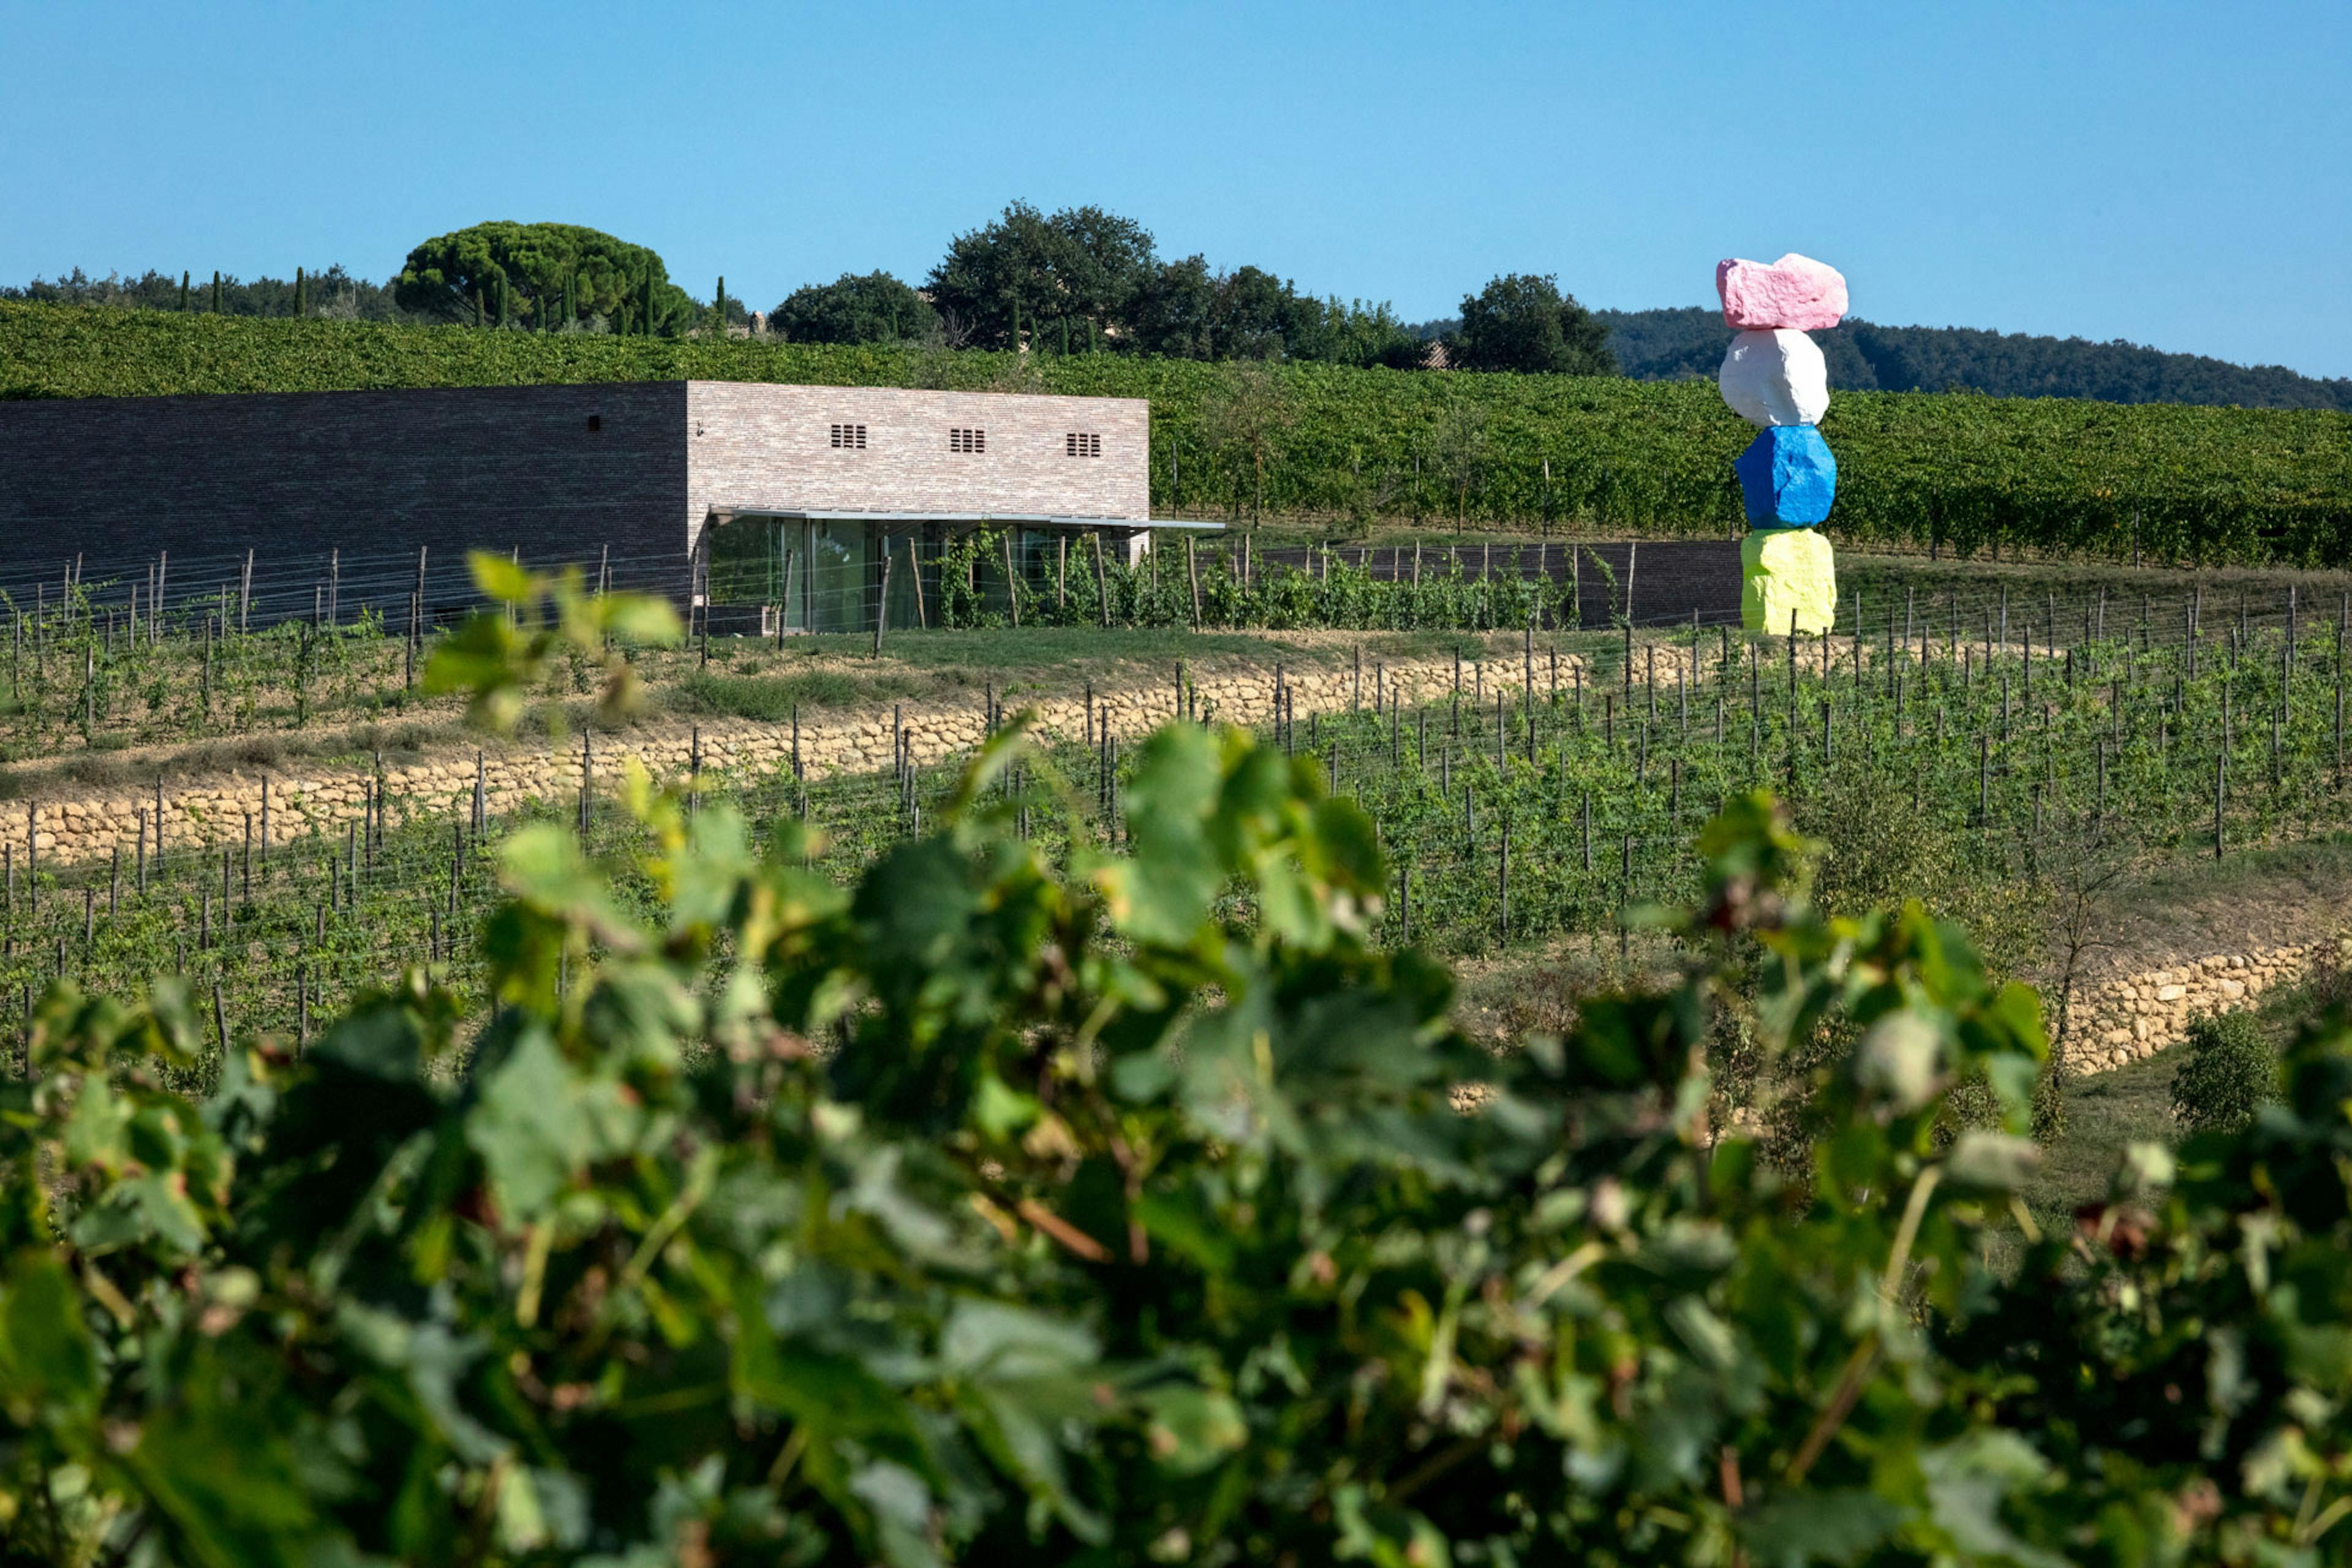 View on the winery with a coloured sculpture of Ugo Rondinone and vineyards in foreground